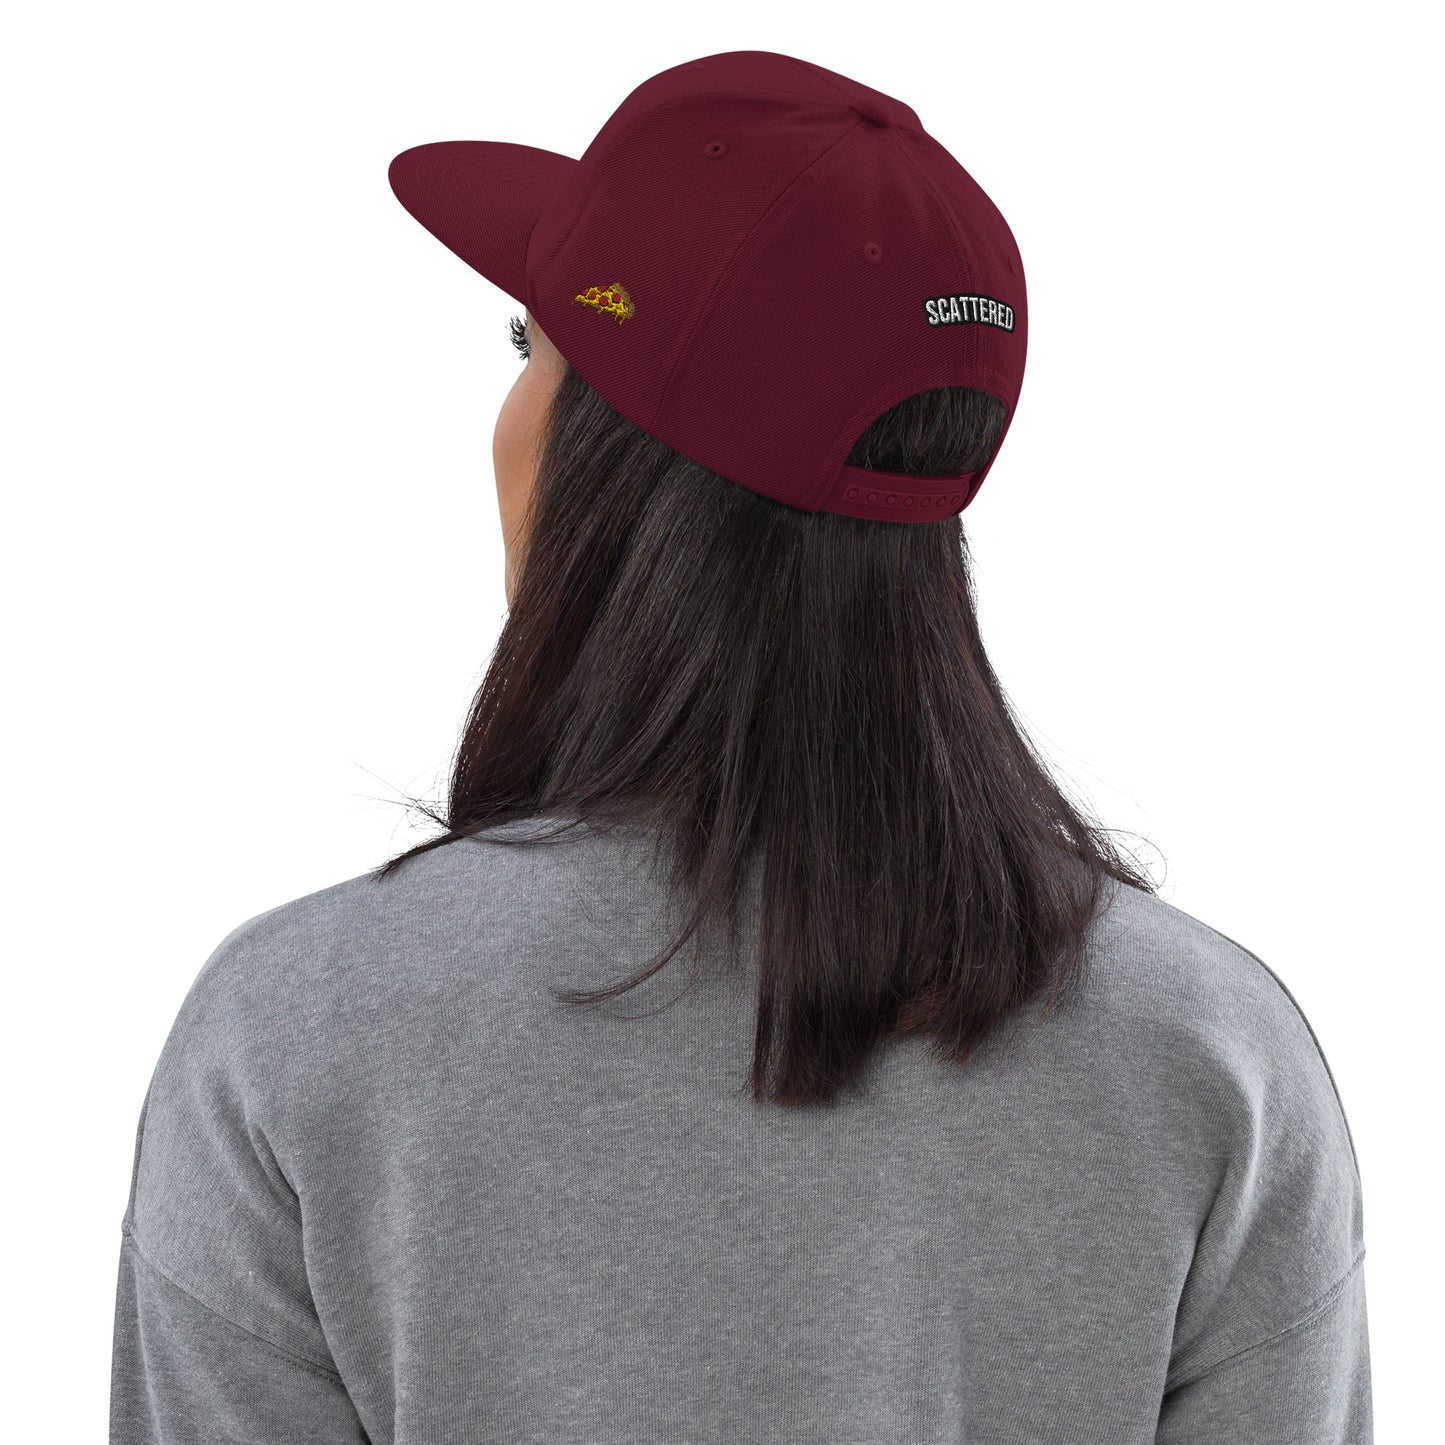 New York Apple Logo Embroidered Burgundy Snapback Hat (Pizza) Scattered Streetwear